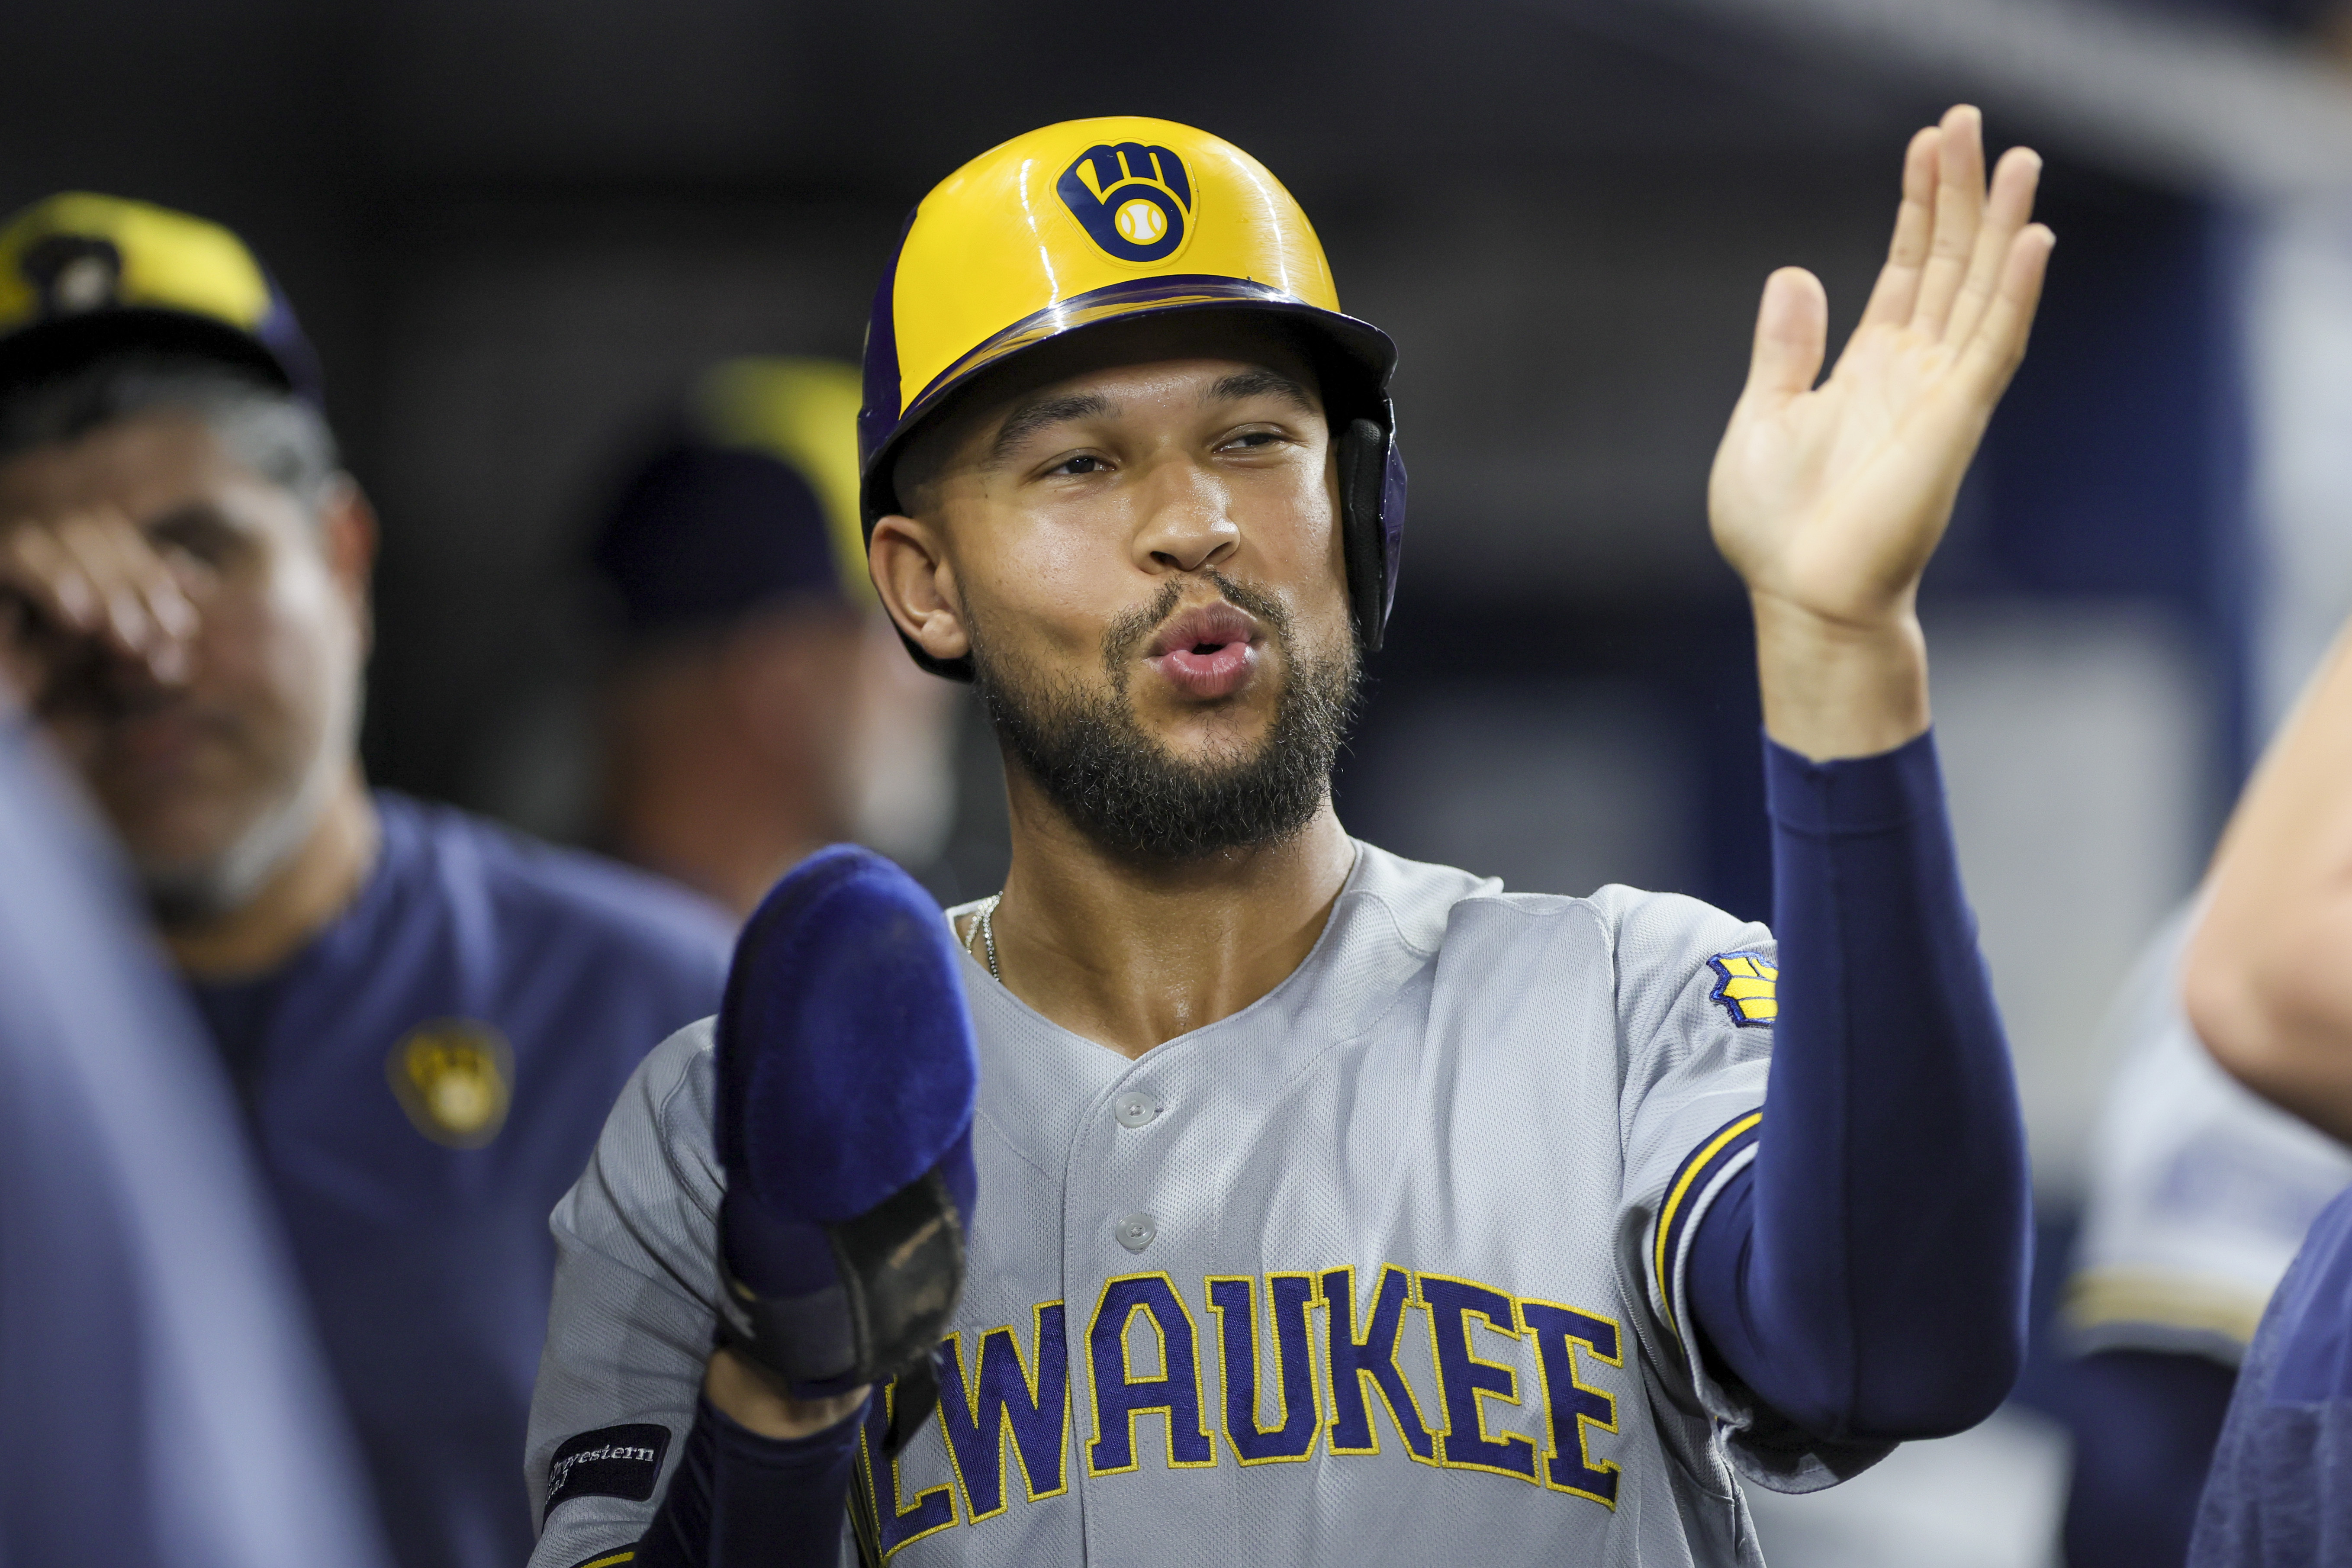 Brewers score 12 runs in one inning, crush Marlins 16-1